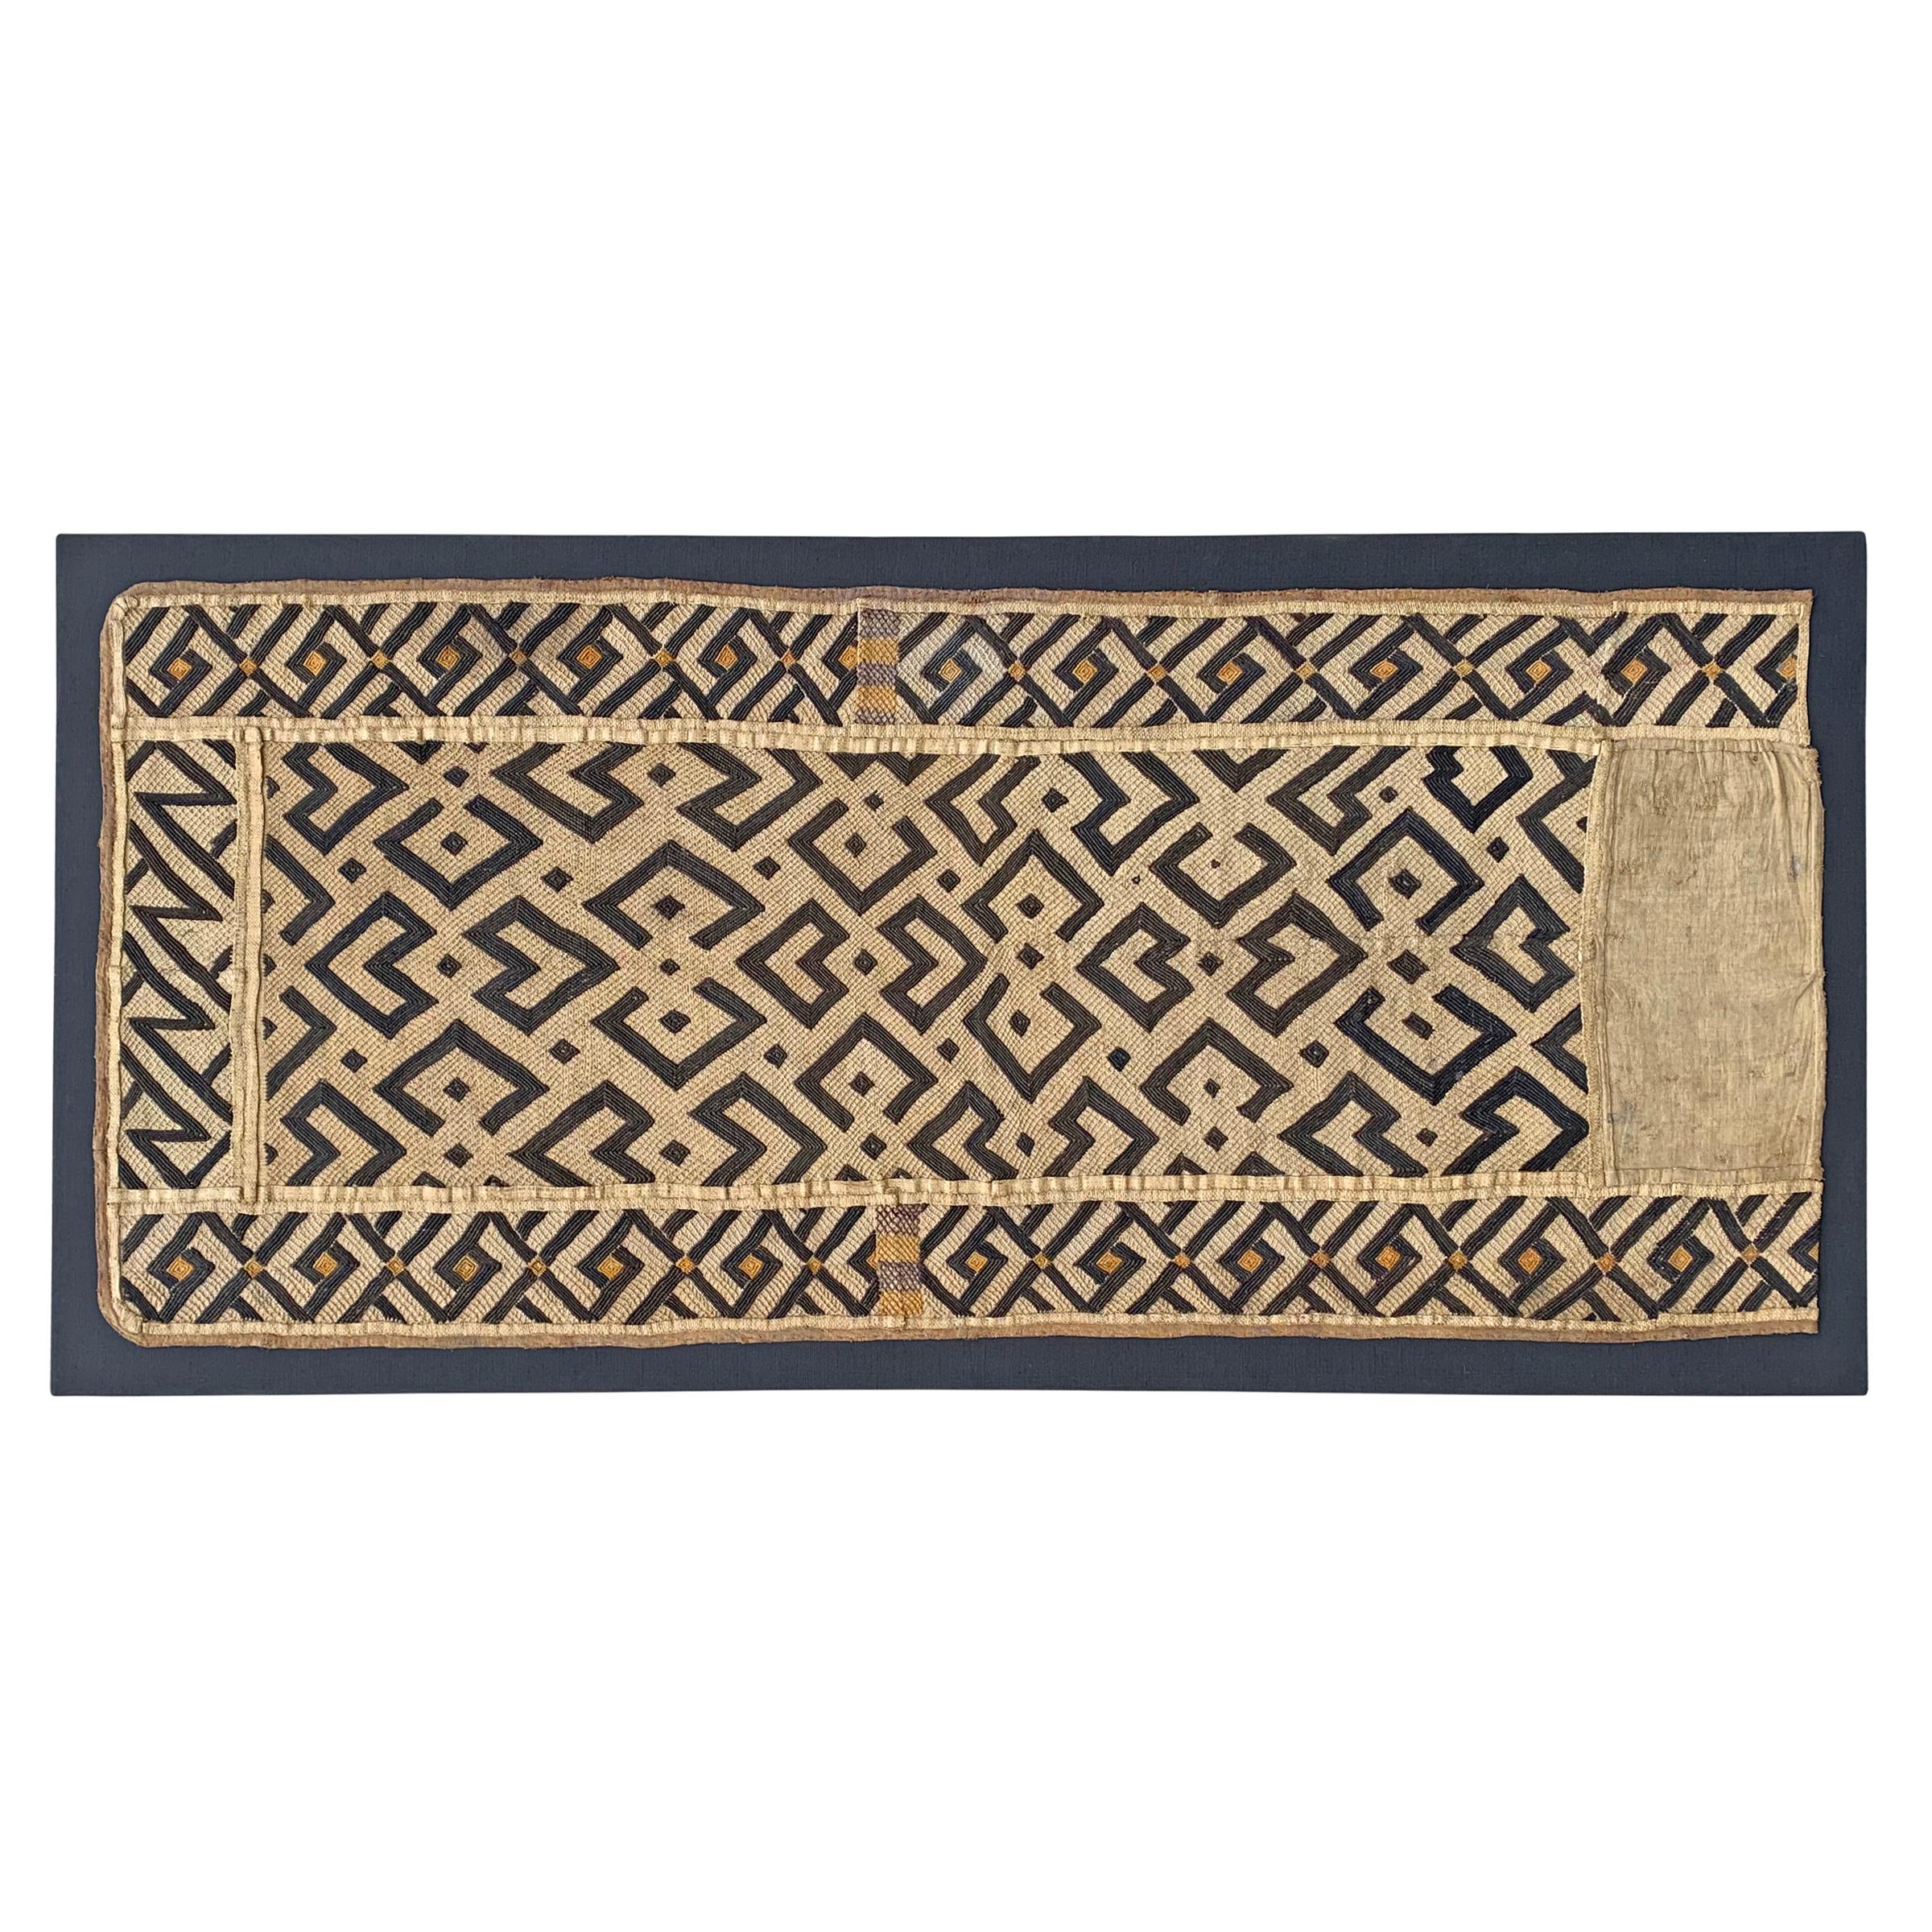 A wonderful early 20th century Kuba cloth panel with a fantastic all-over geometric pattern woven in black and natural raffia. Kuba cloths are constructed of fine strips of raffia, knotted and cut, creating beautiful geometric patterns. This piece